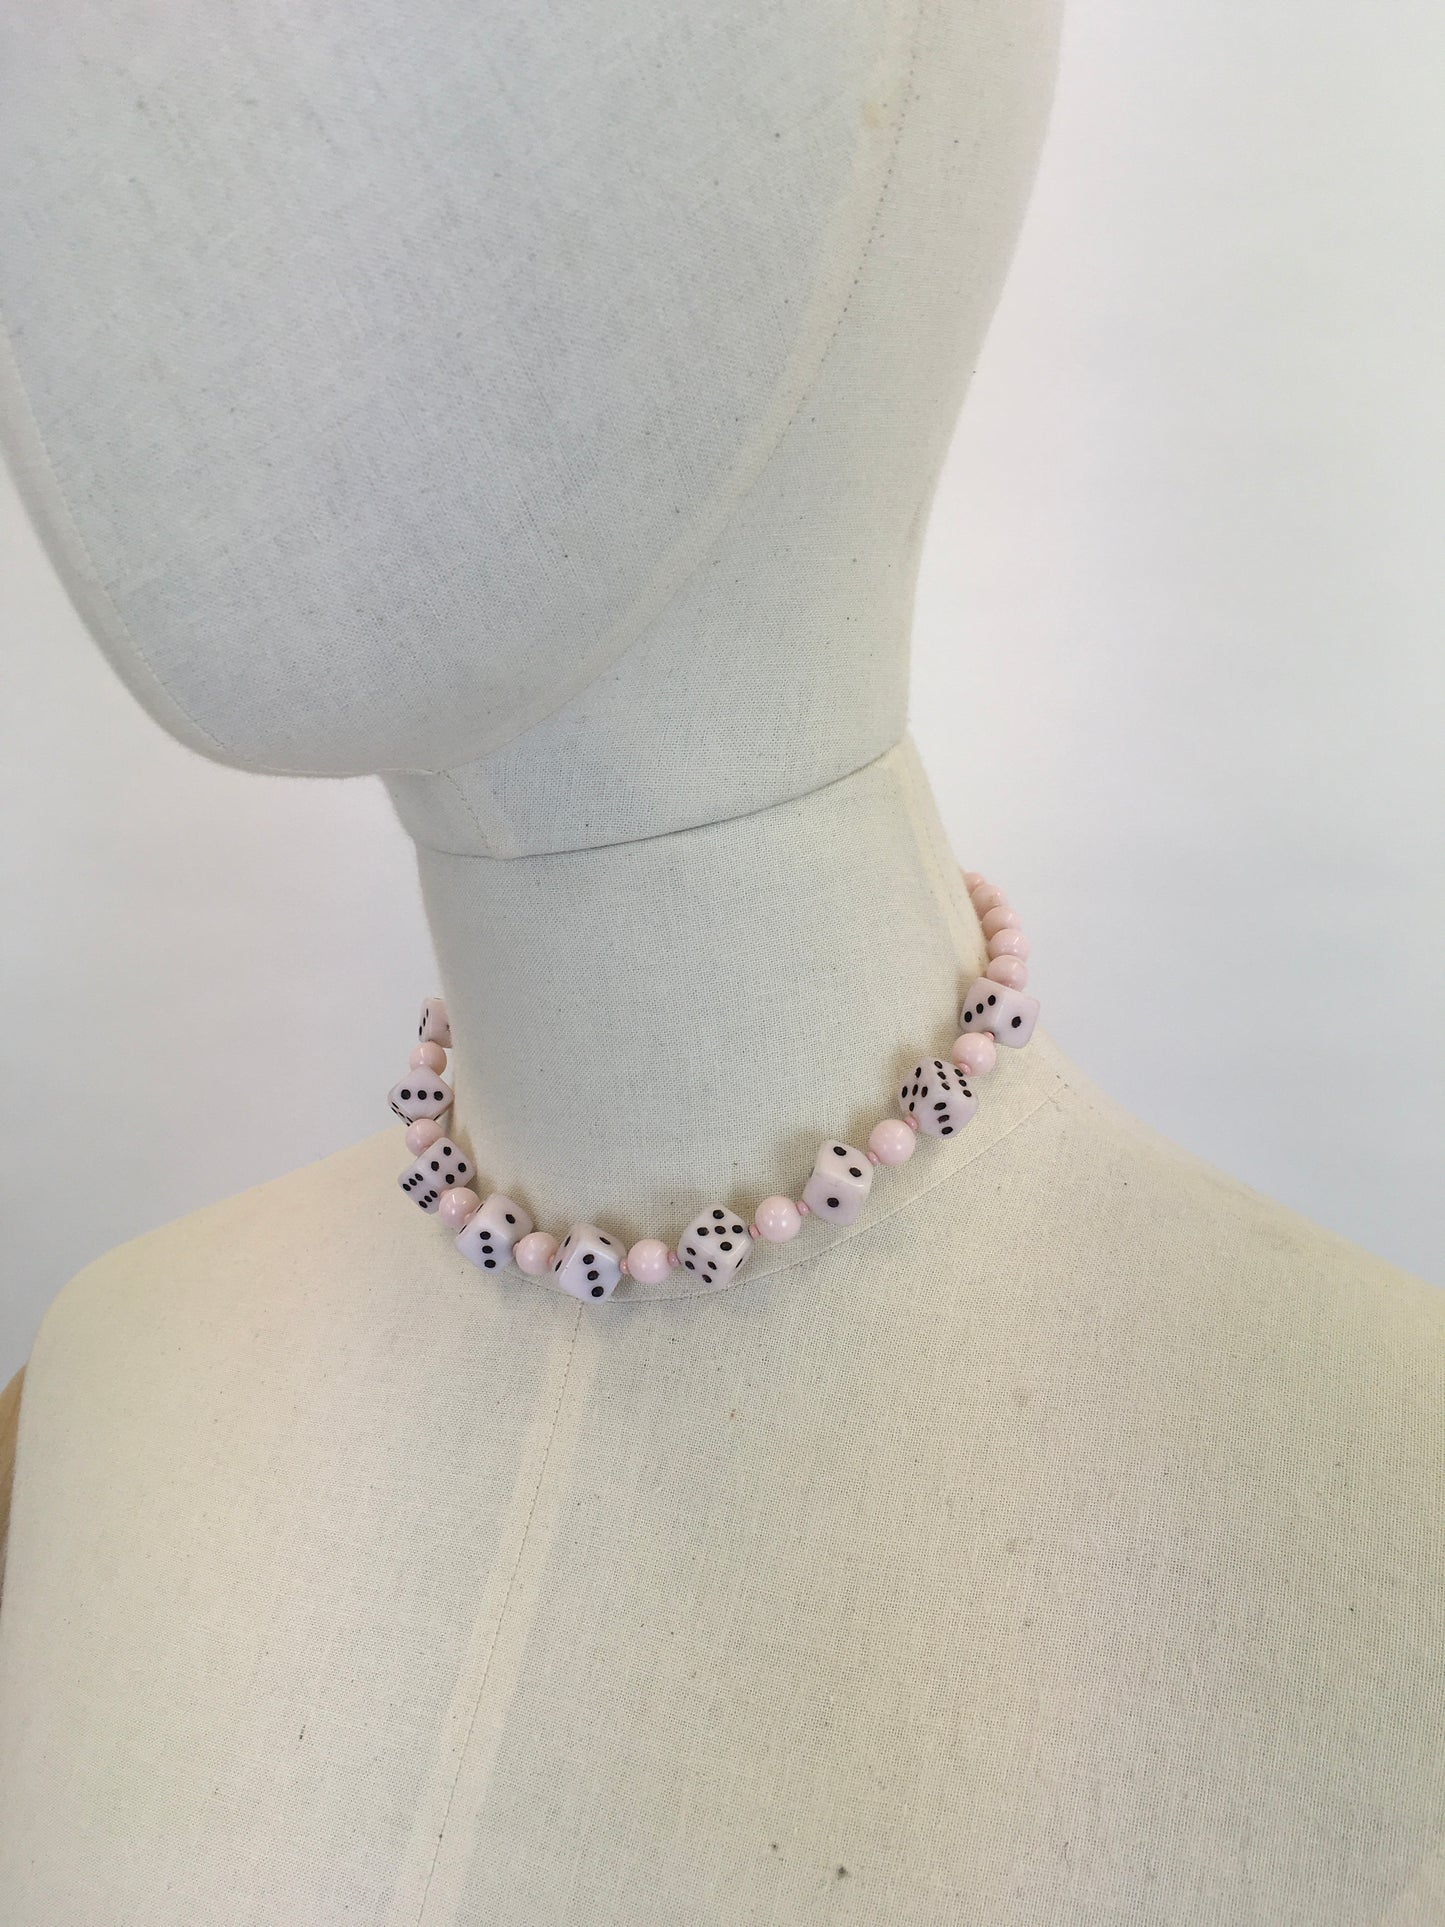 Original 1950s Pale Pink Novelty Dice Necklace - Made From Milk Bottle Glass